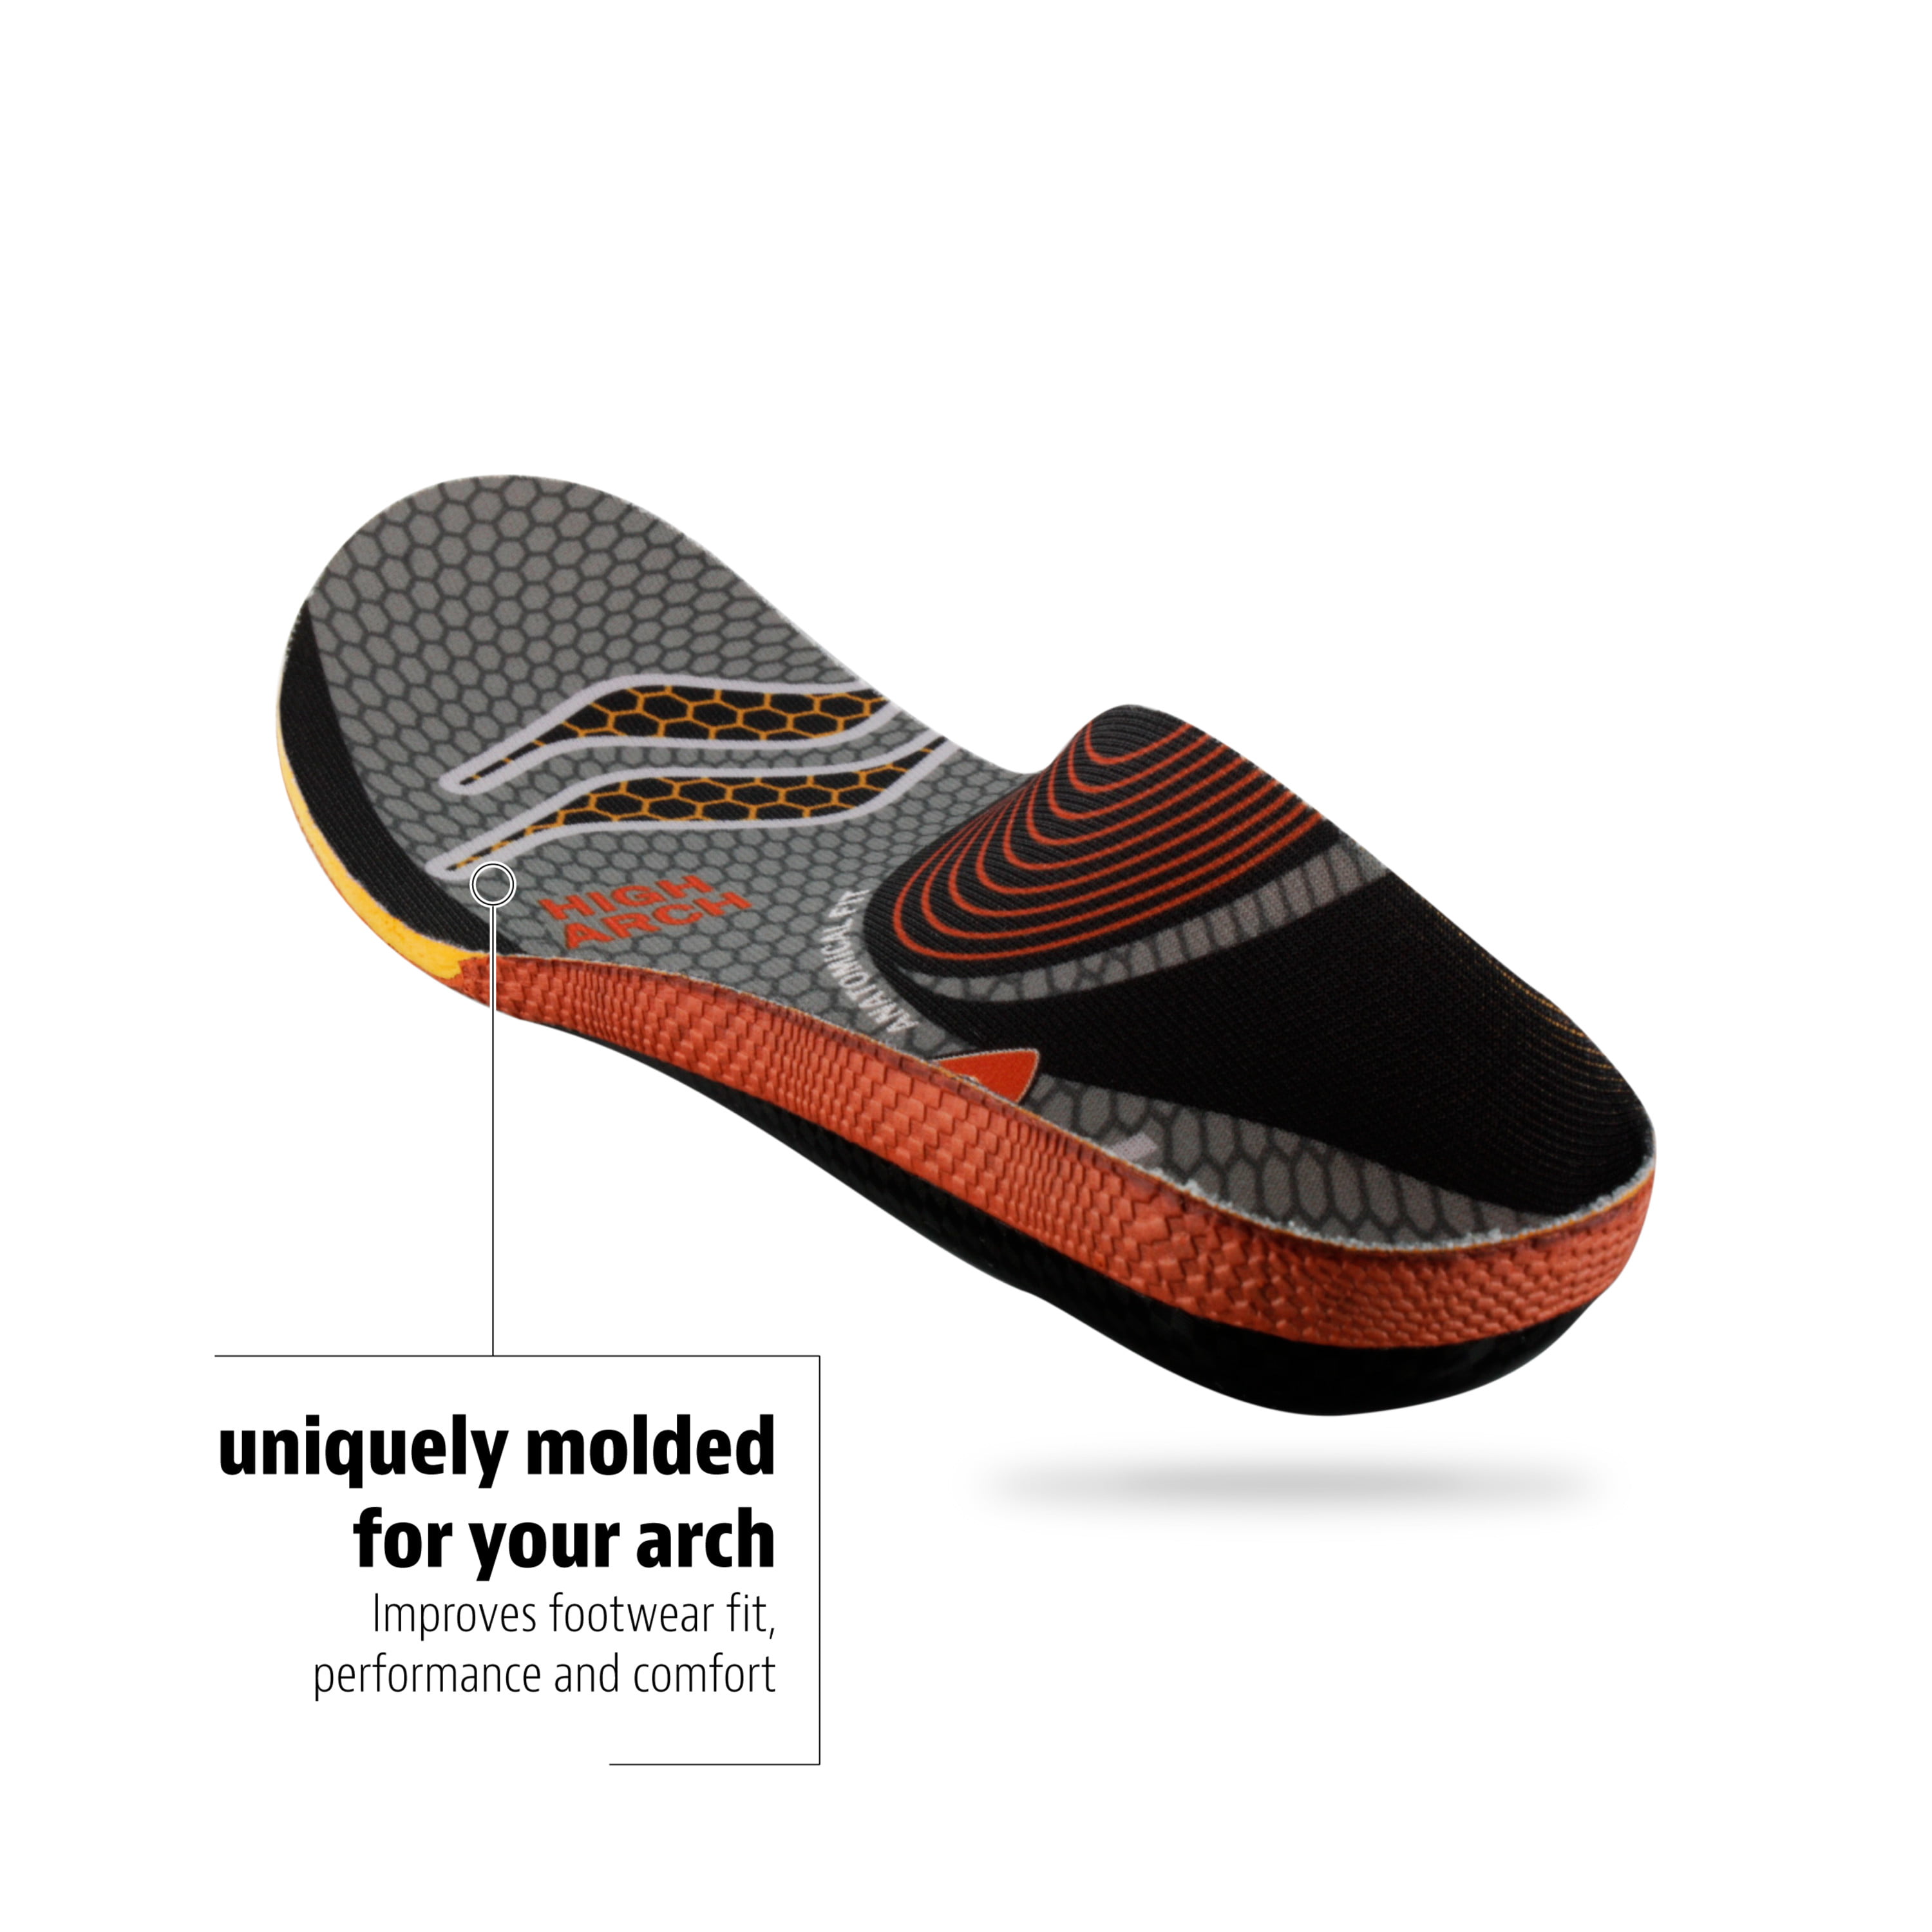 sof sole fit high arch insoles